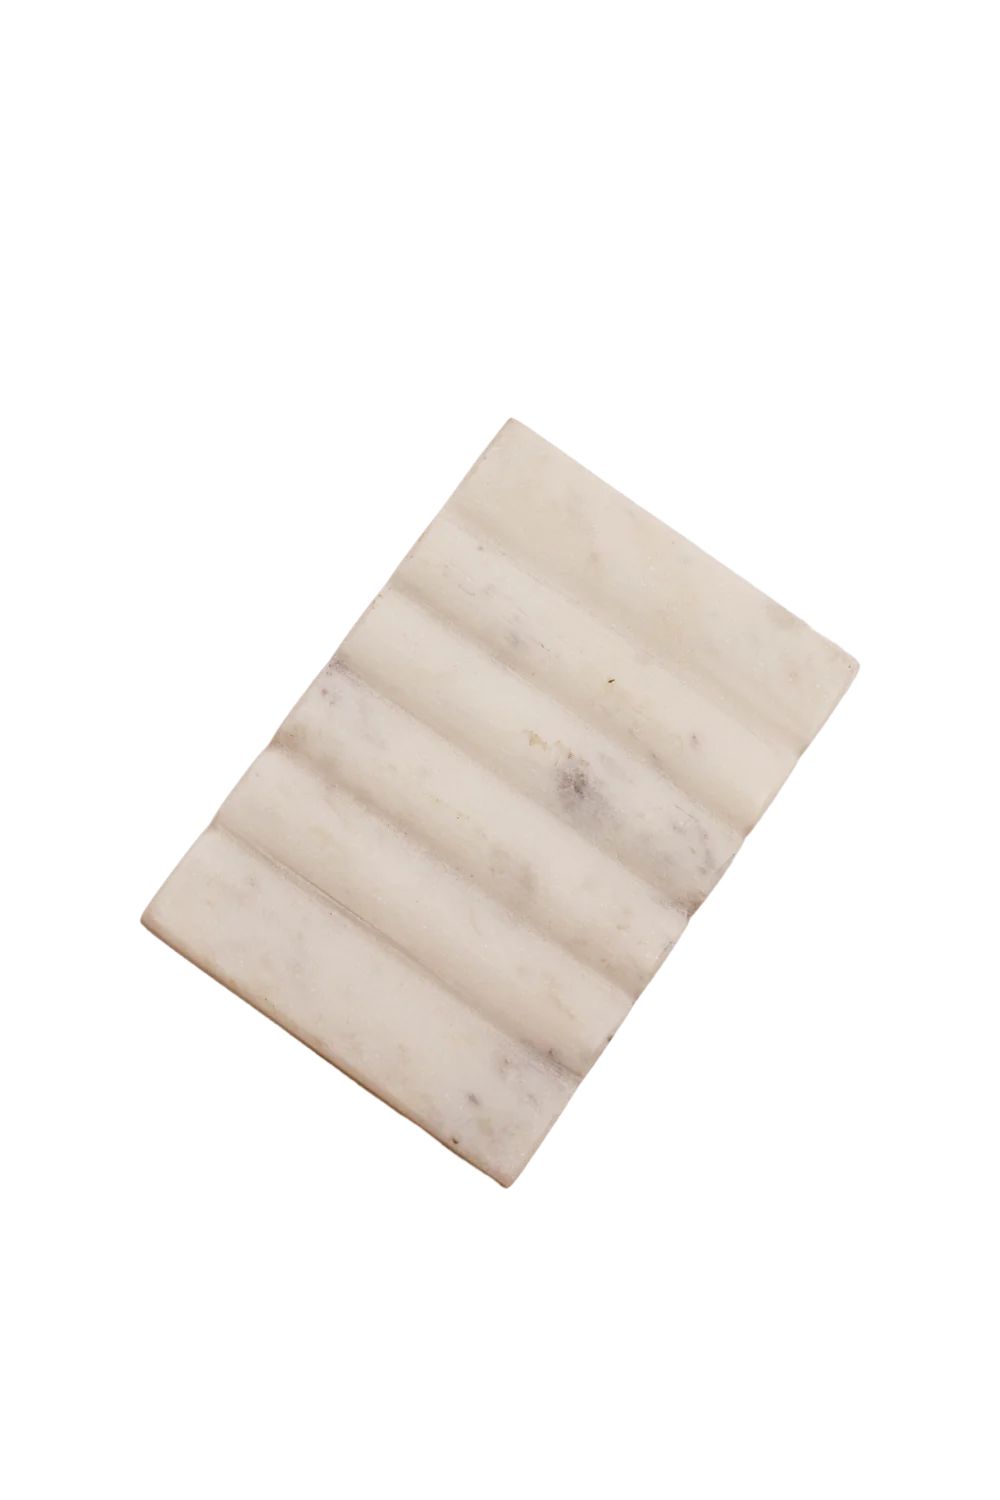 Marble Scallop Soap Dish | Luxe B Co